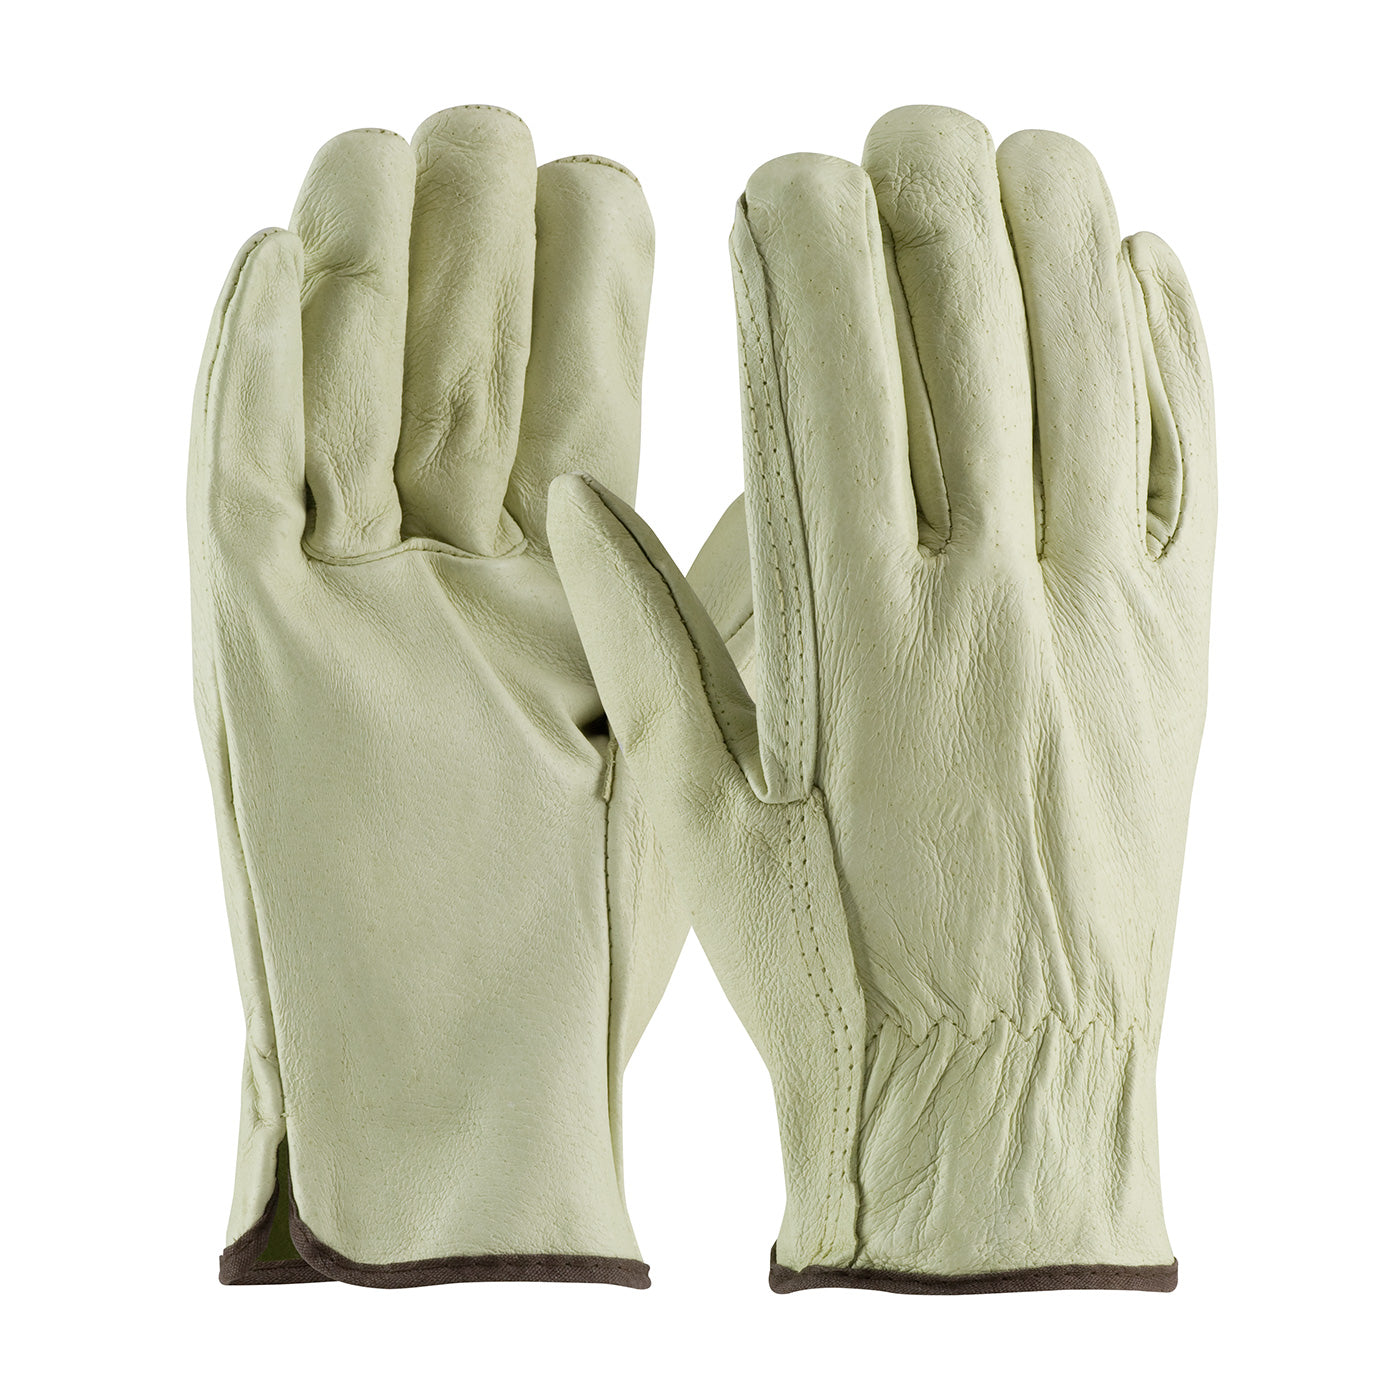 West Chester 994/L Regular Grade Top Grain Pigskin Leather Drivers Glove - Straight Thumb